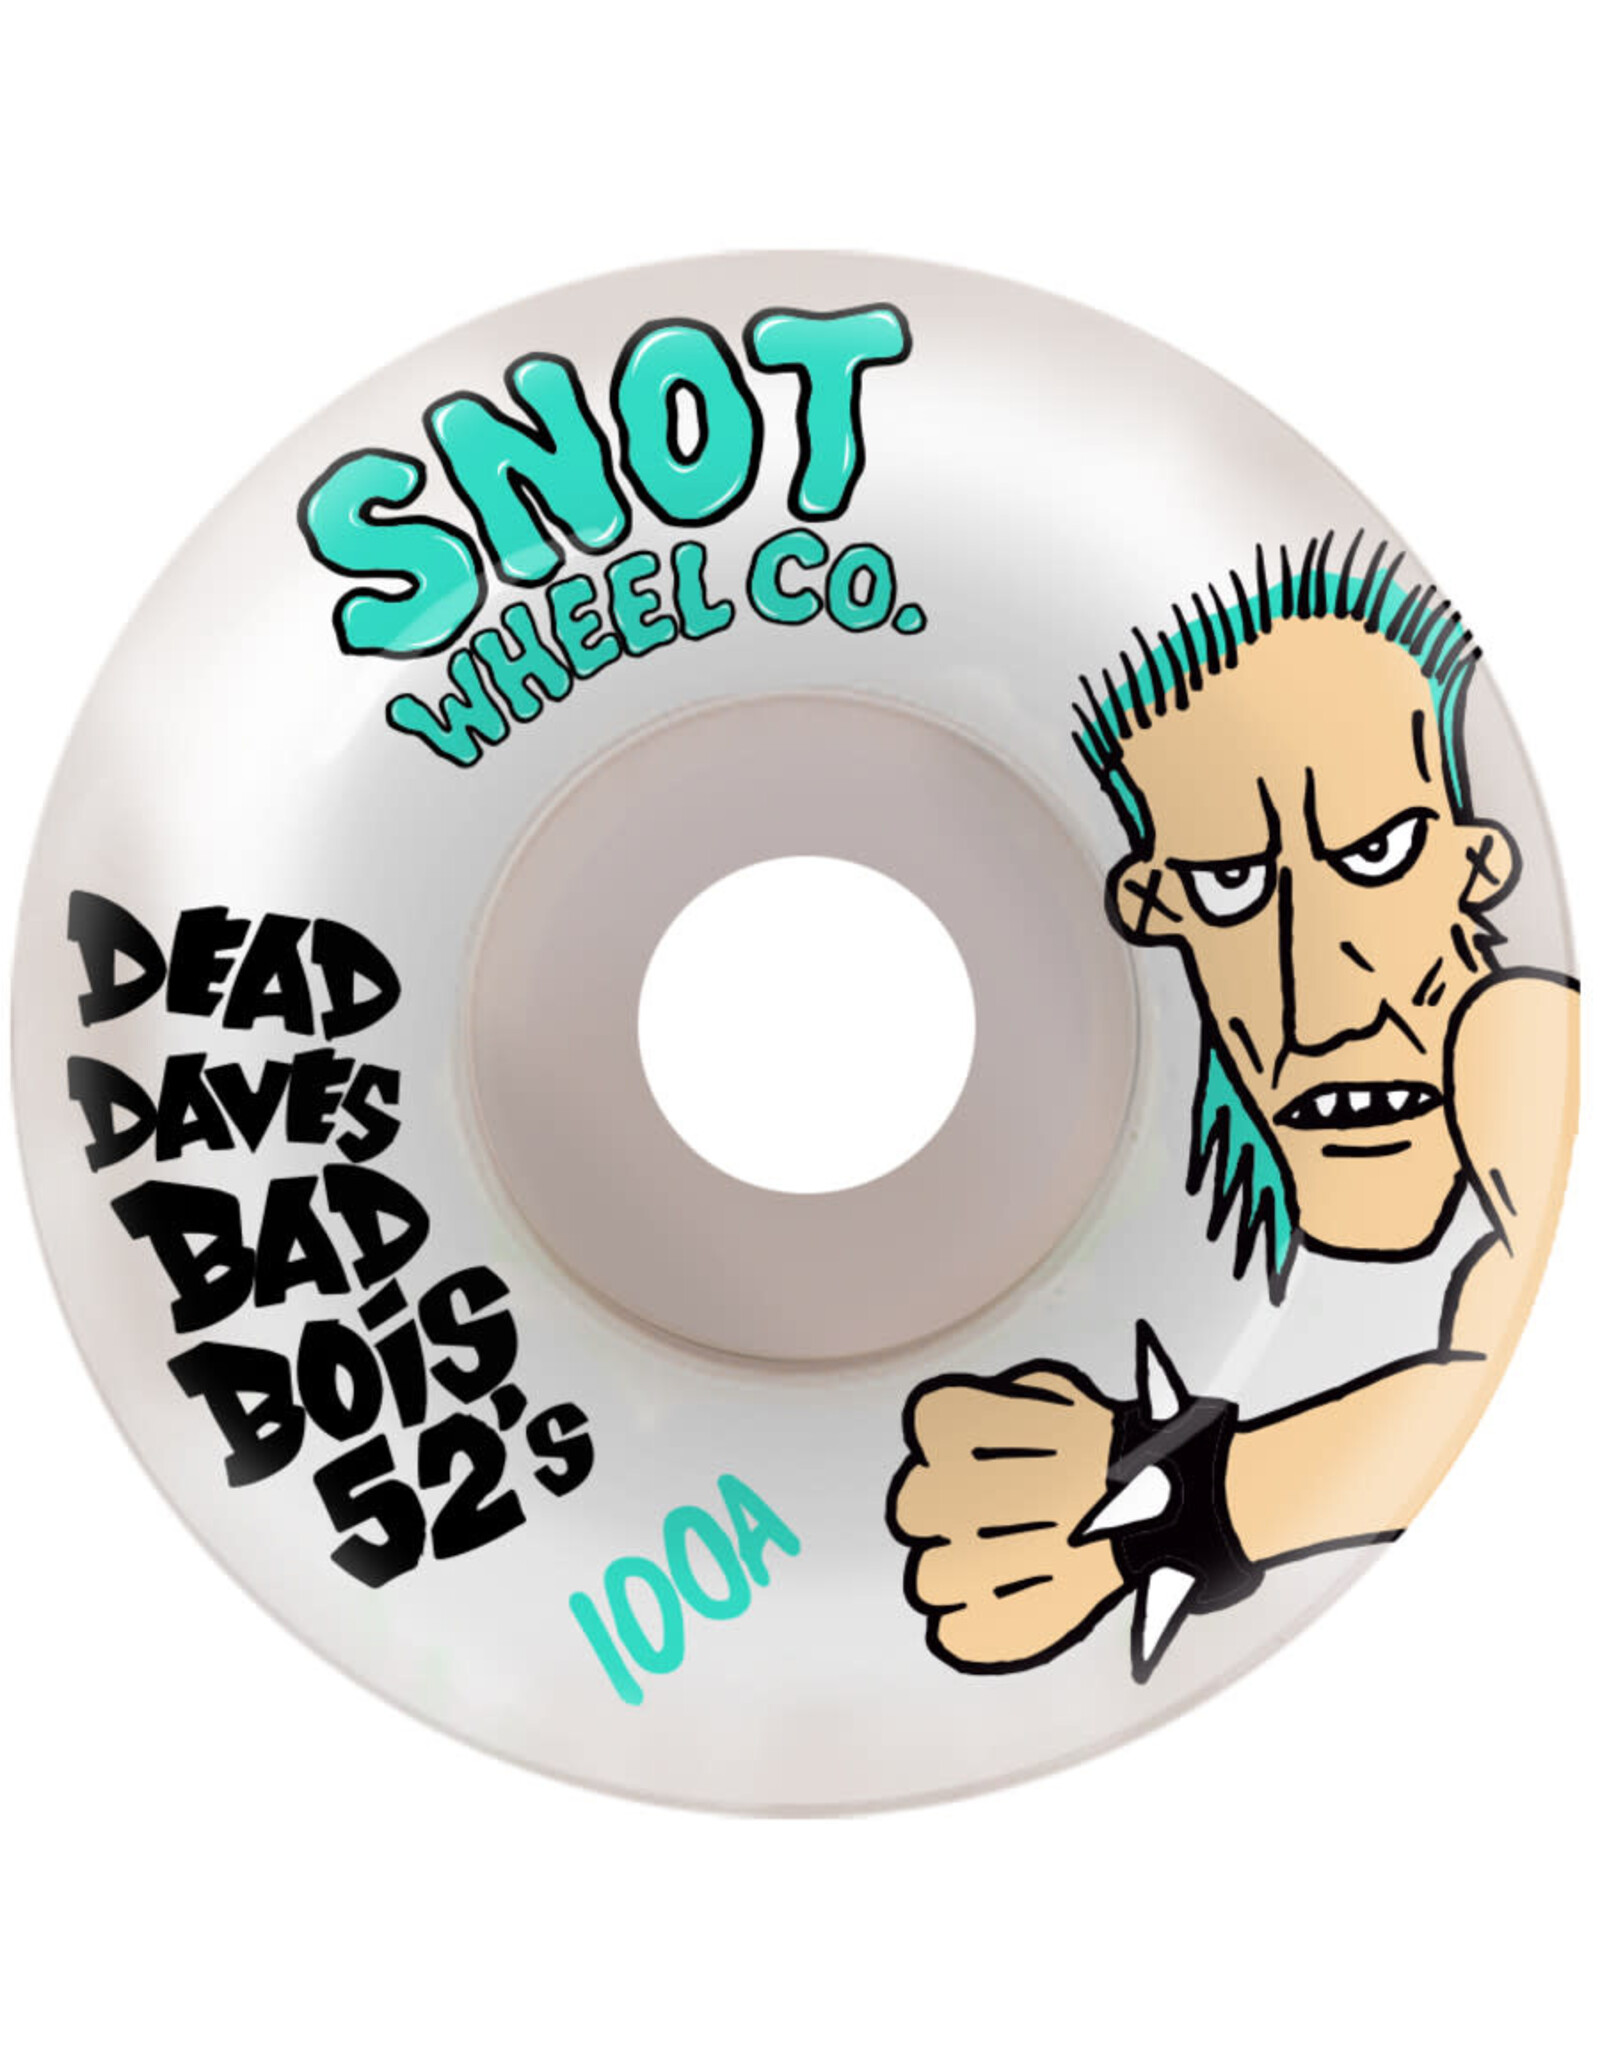 Snot Snot Wheels Dead Daves Bad Boi's Conical (52mm/101a)